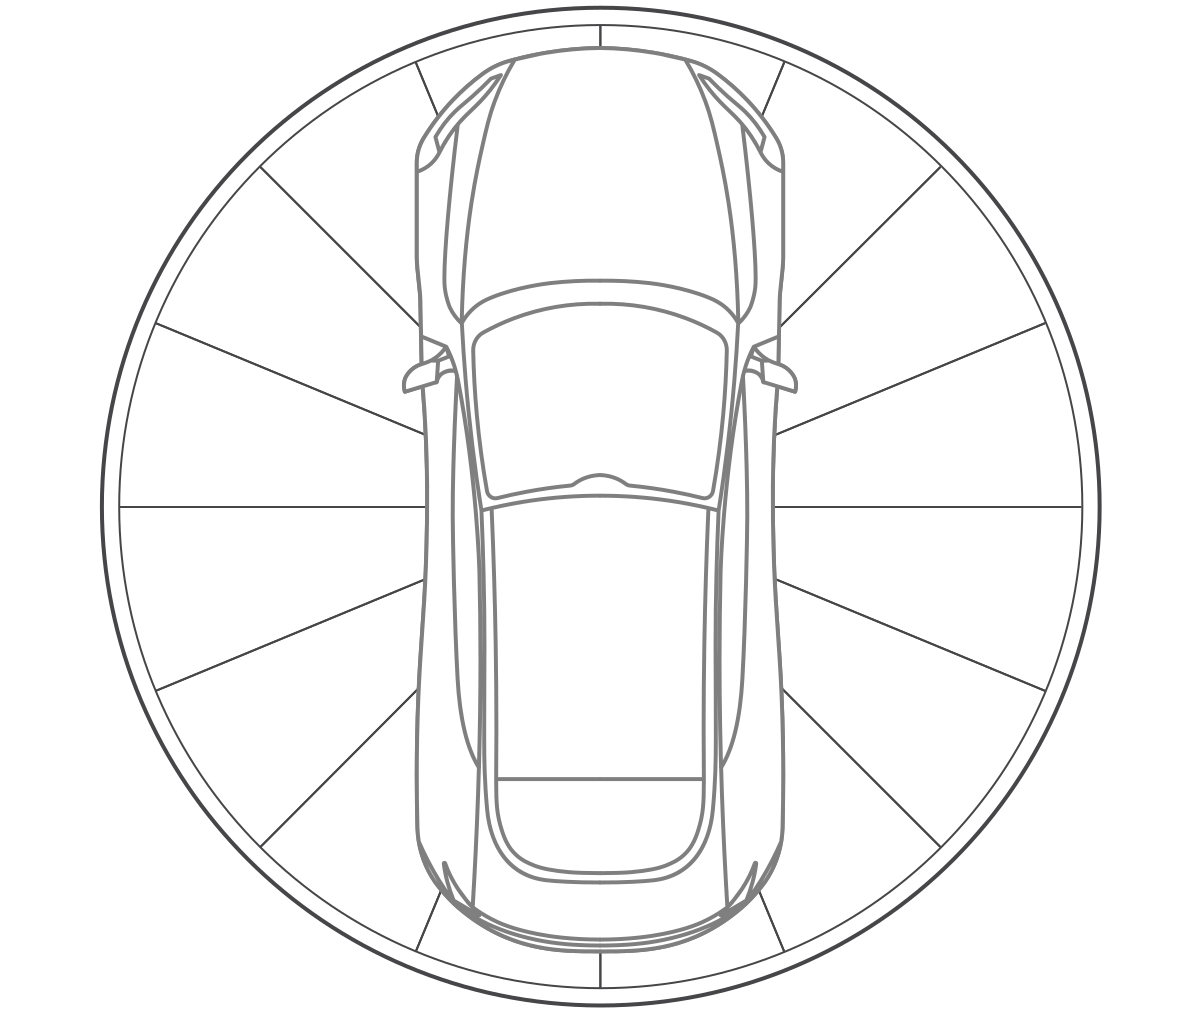 Line drawing diagram of a car turntable from birds eye view